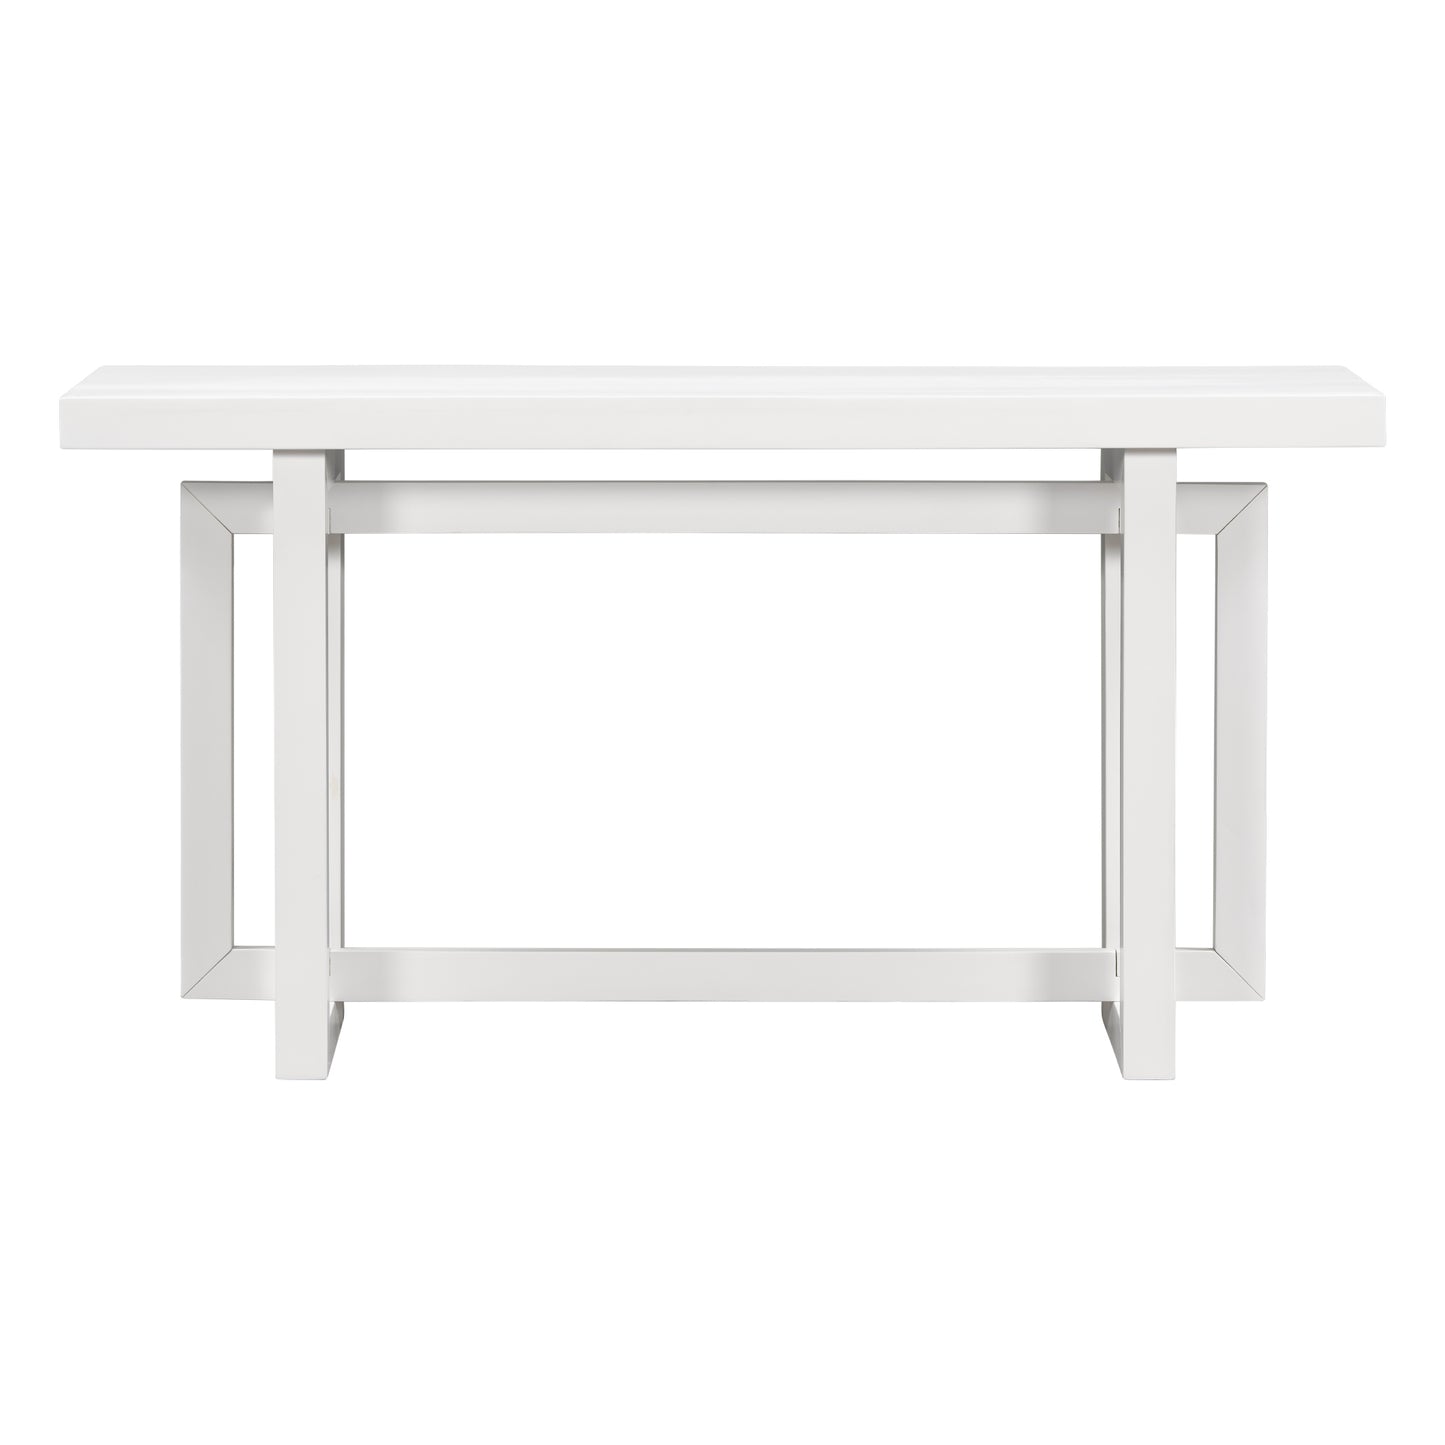 U_STYLE Contemporary Console Table with Wood Top, Extra Long Entryway Table for Entryway, Hallway, Living Room, Foyer, Corridor